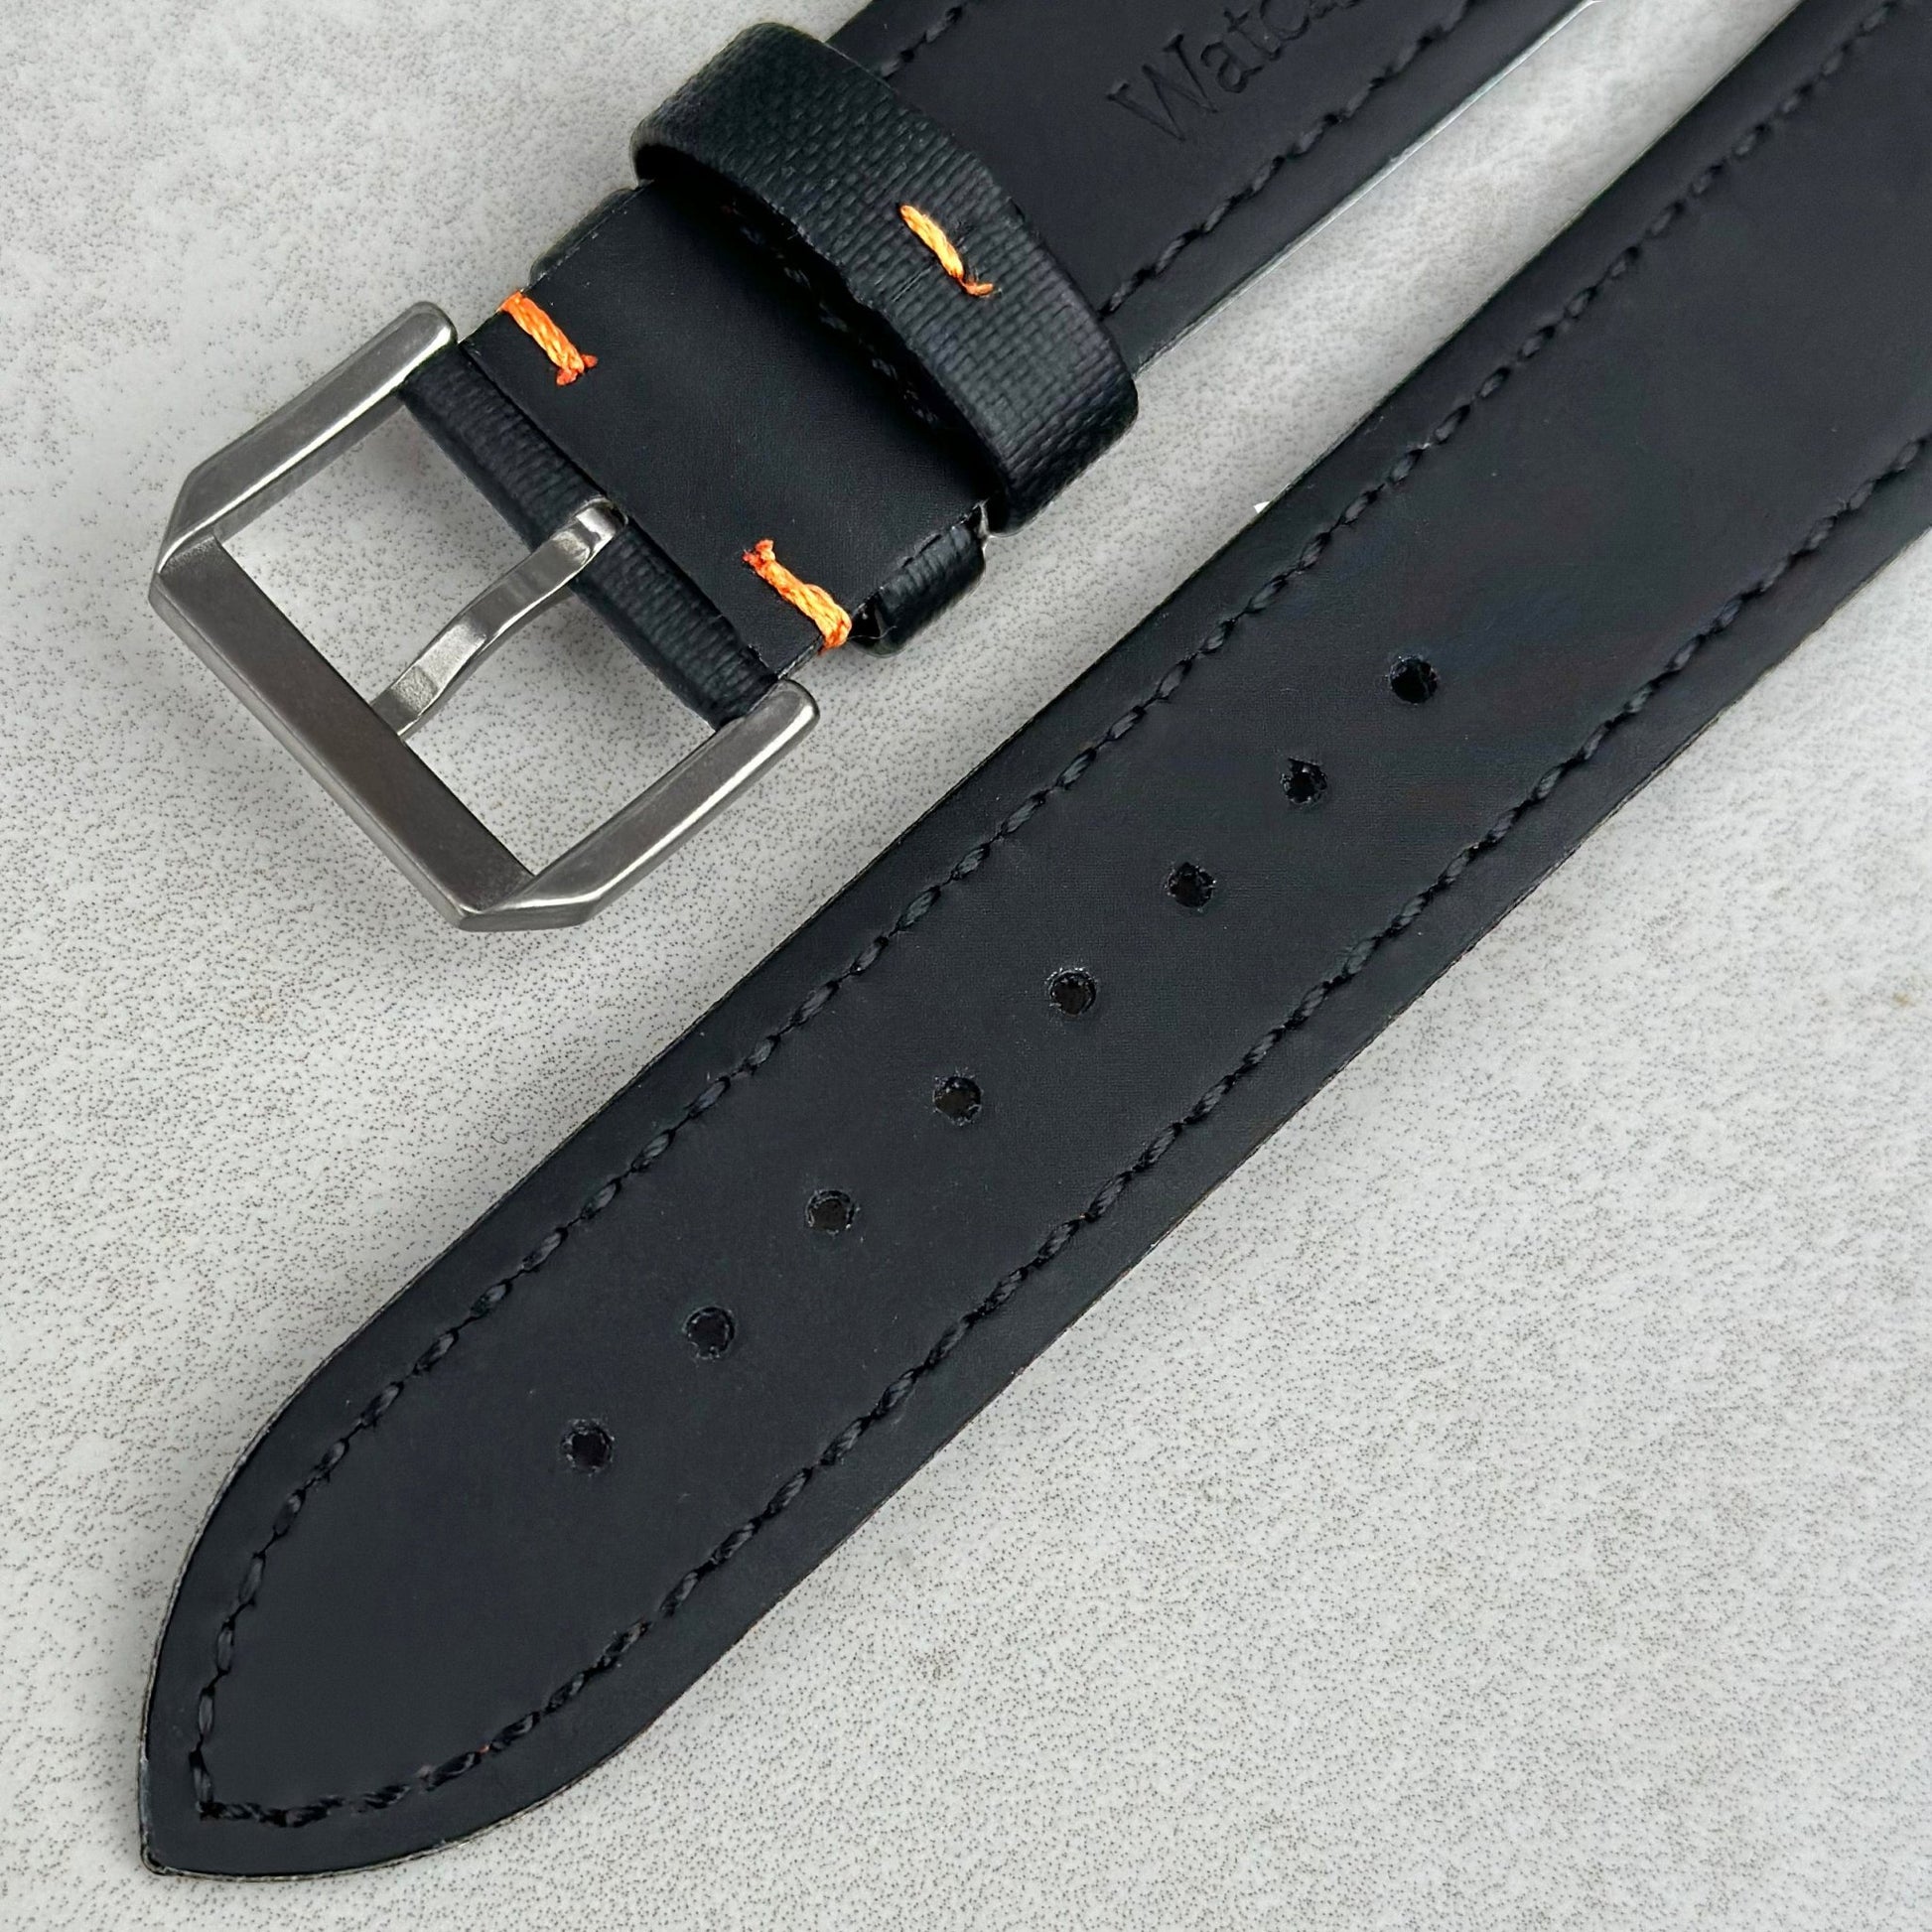 Underside of the brushed 316L stainless steel buckle on the Bermuda jet black sail cloth watch strap with orange stitching.